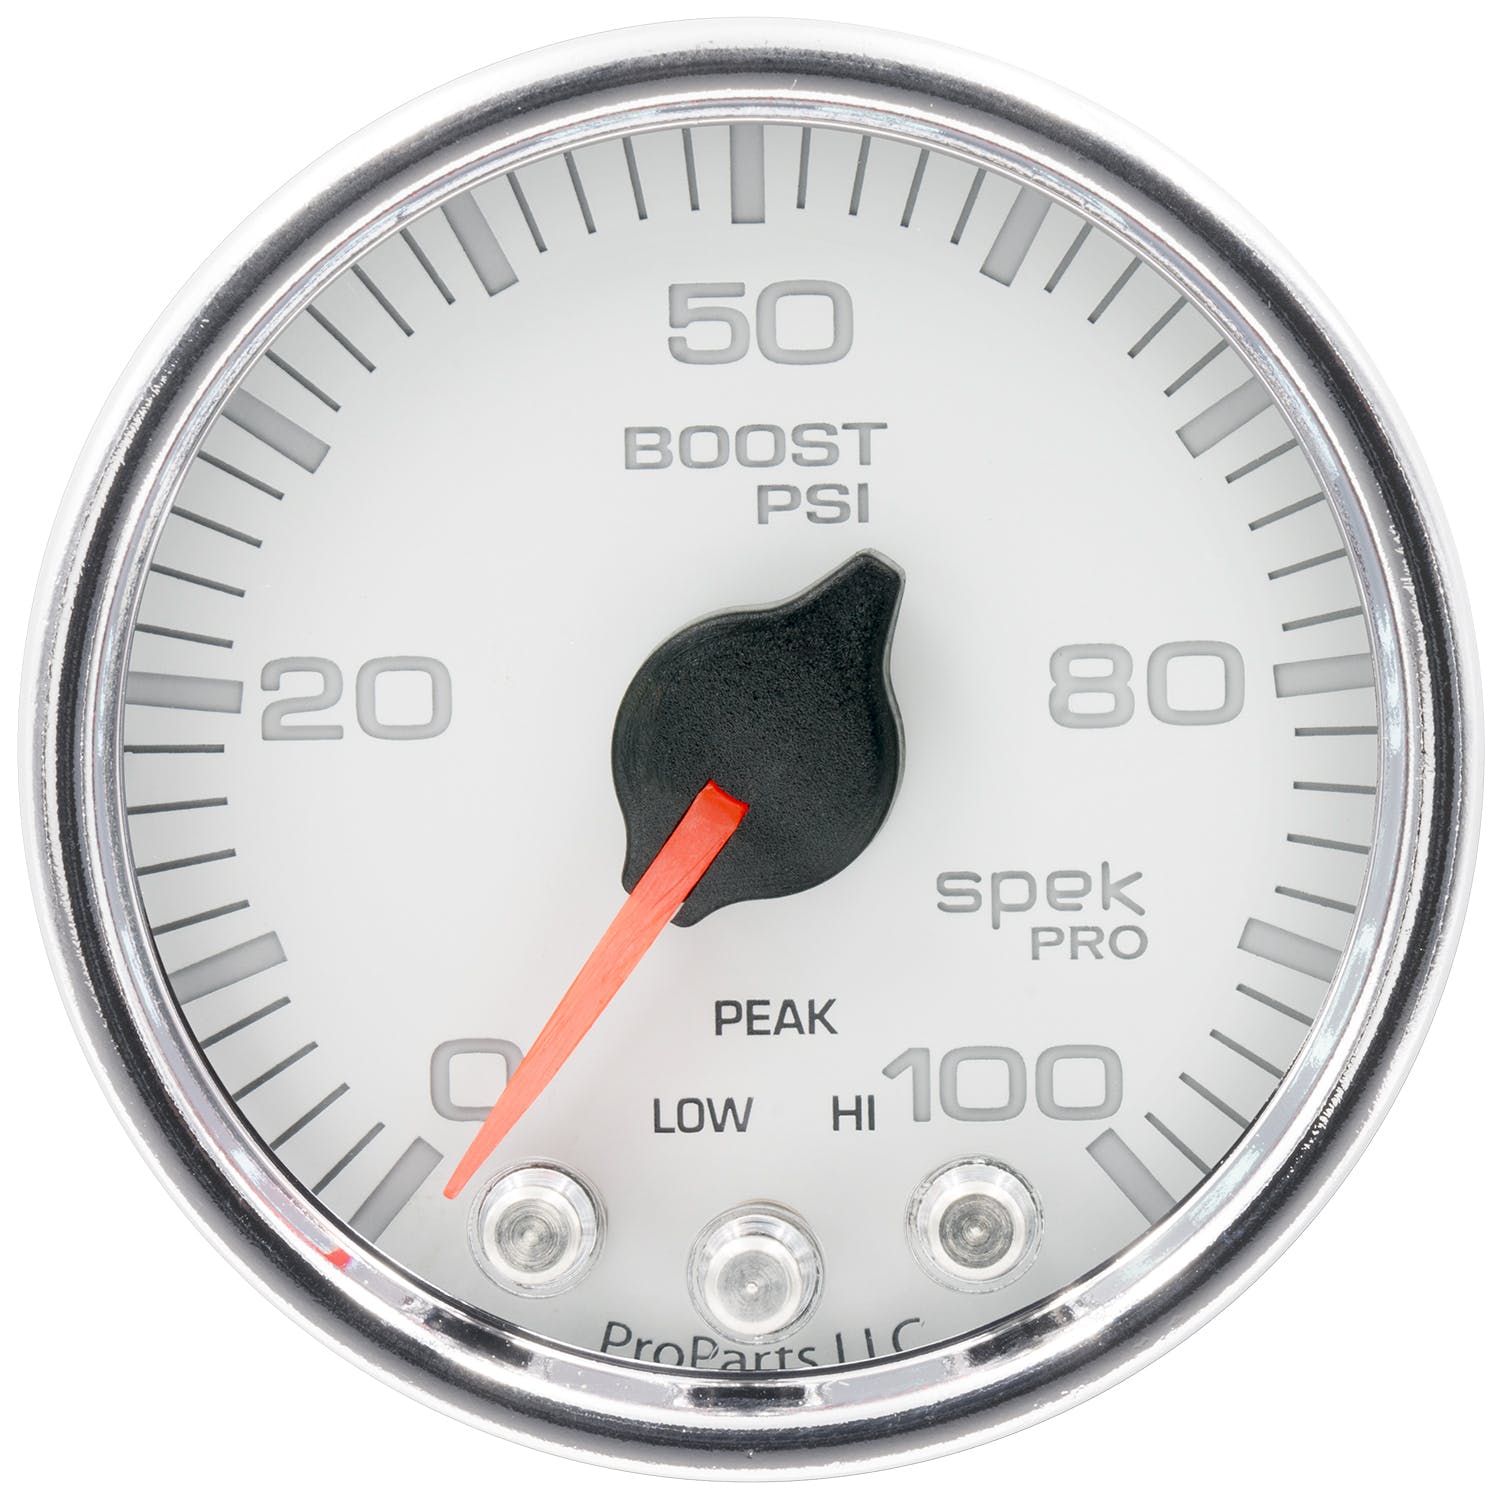 AutoMeter Products P30511 Boost Gauge, 2 1/16, 100PSI, Stepper Motor w/Peak and Warning, White/Chrome